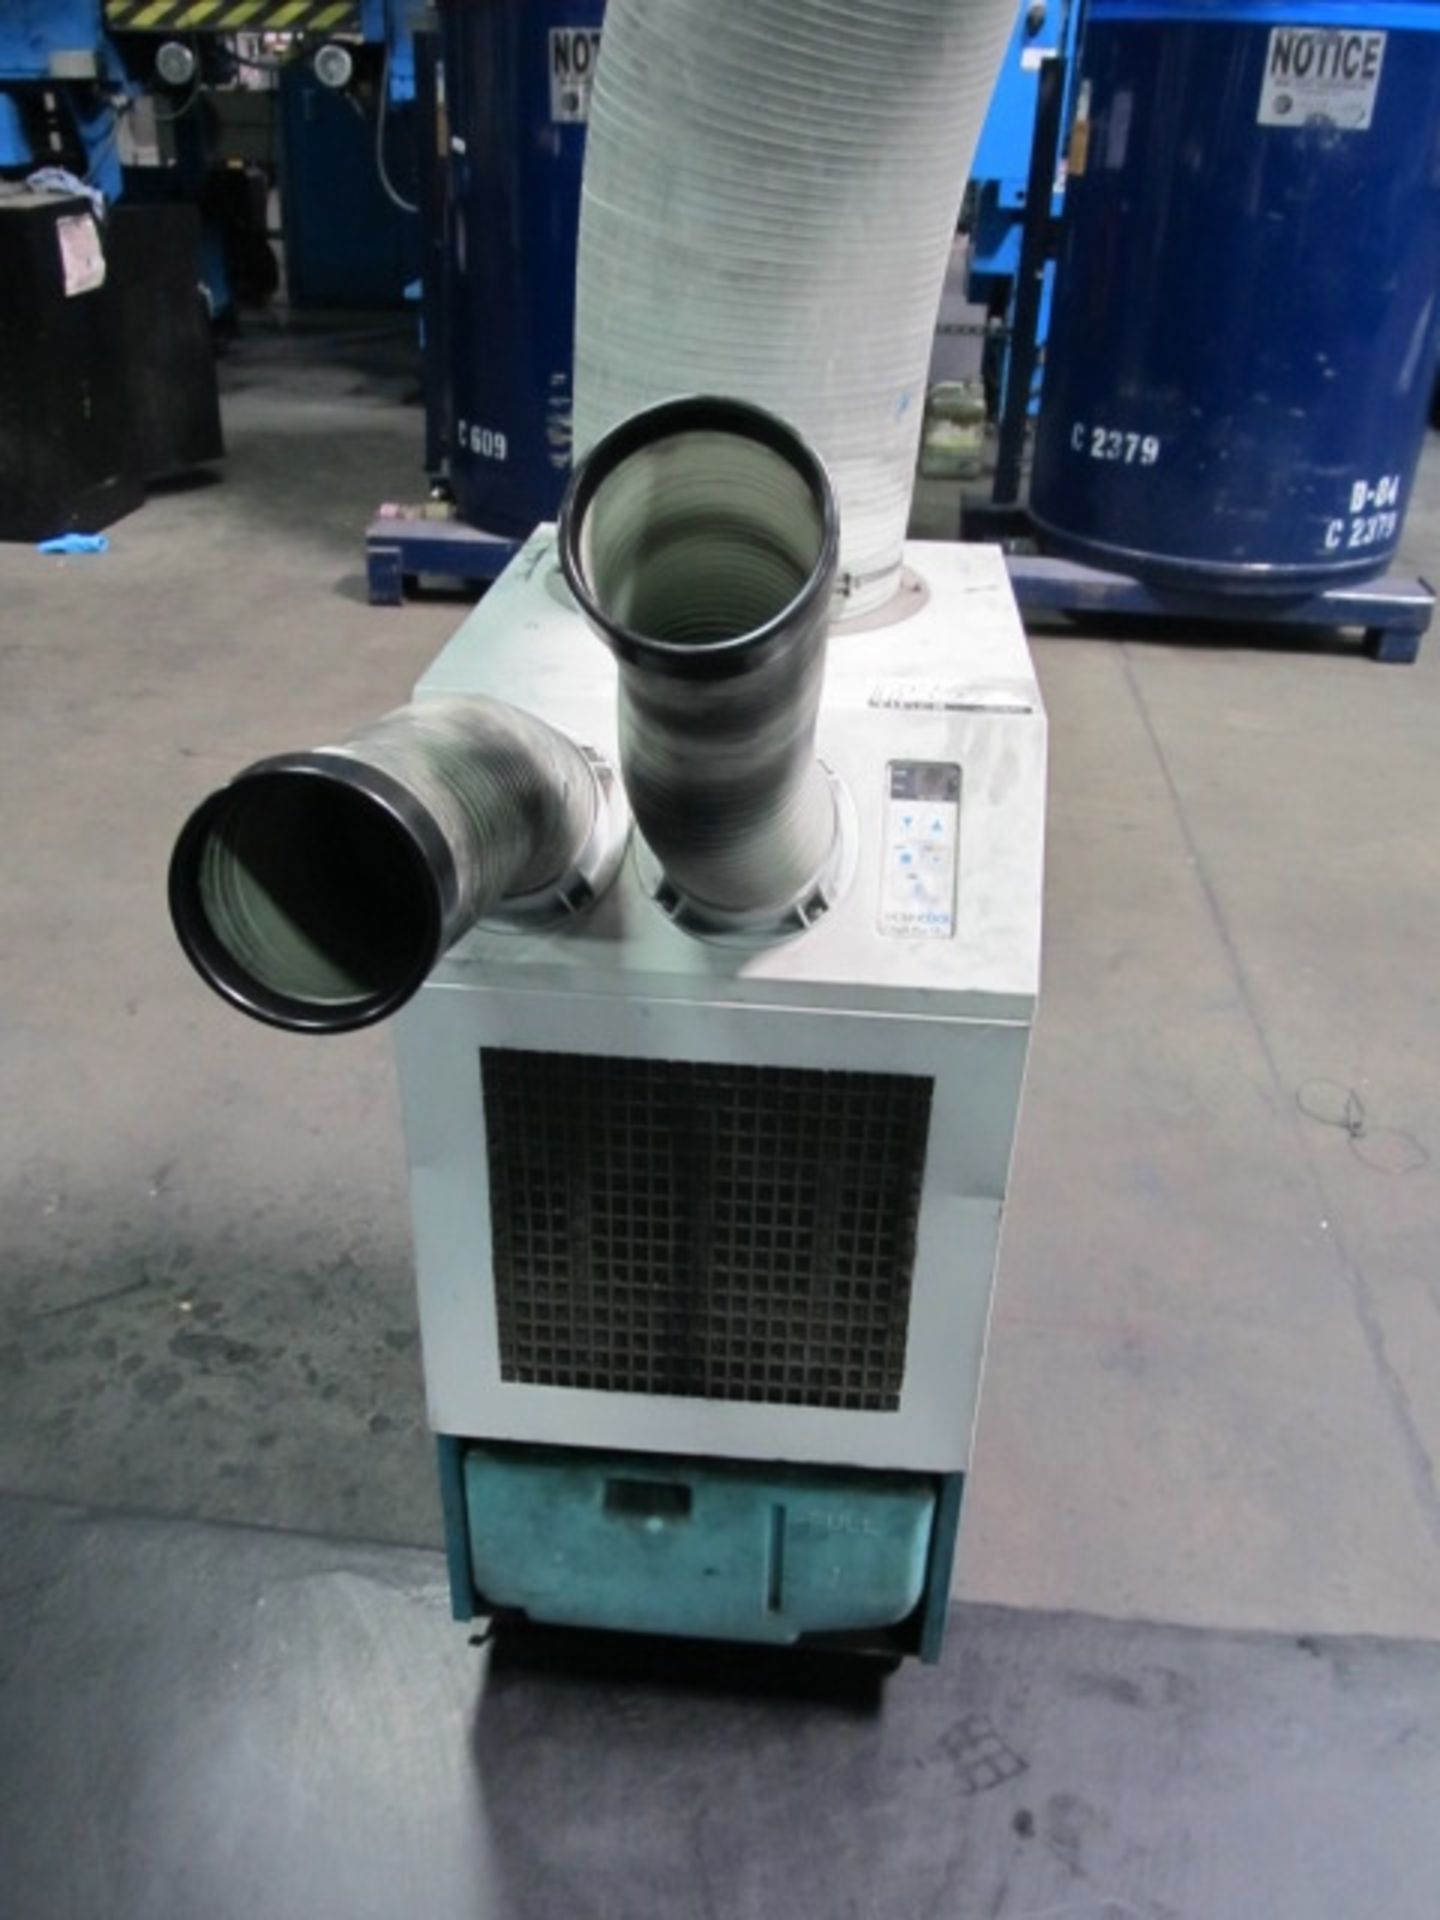 Movin Cool Portable Spot Cooling System, Model Classic Plus 14. Asset Location: West Warehouse, Site